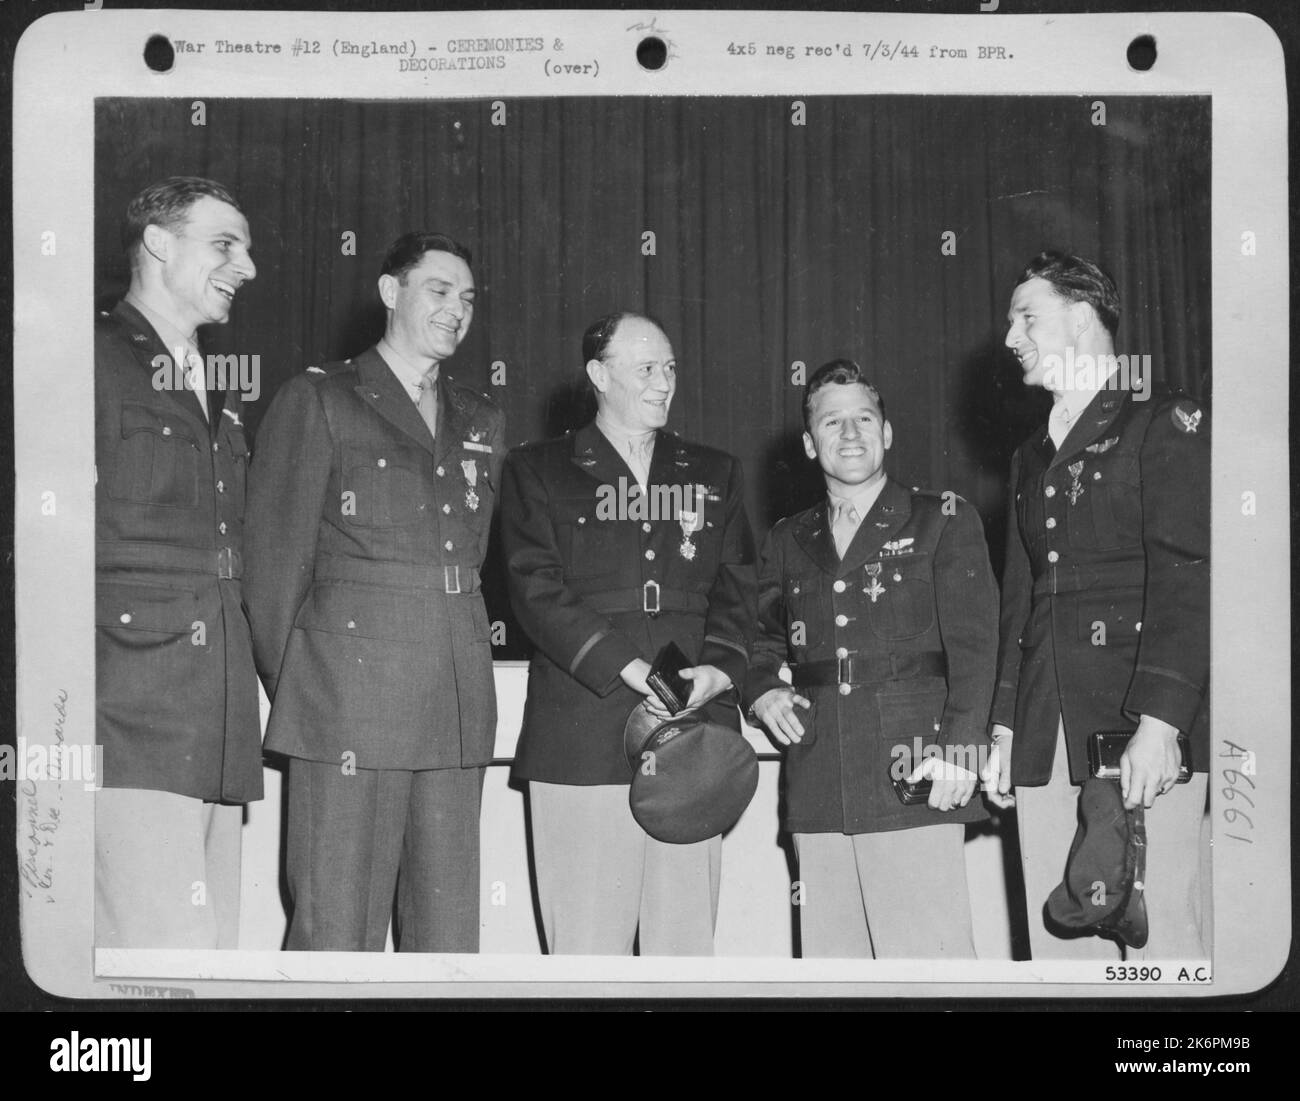 ENGLAND-Officers grouped after the medal presentation. They are left to right: Capt. Francis G. Lauro; Col. Charles M. Taylor; Col. Kenneth R. Collins; Capt. Robert J. Rankin; and Lt. Charles F. Gowder. Stock Photo